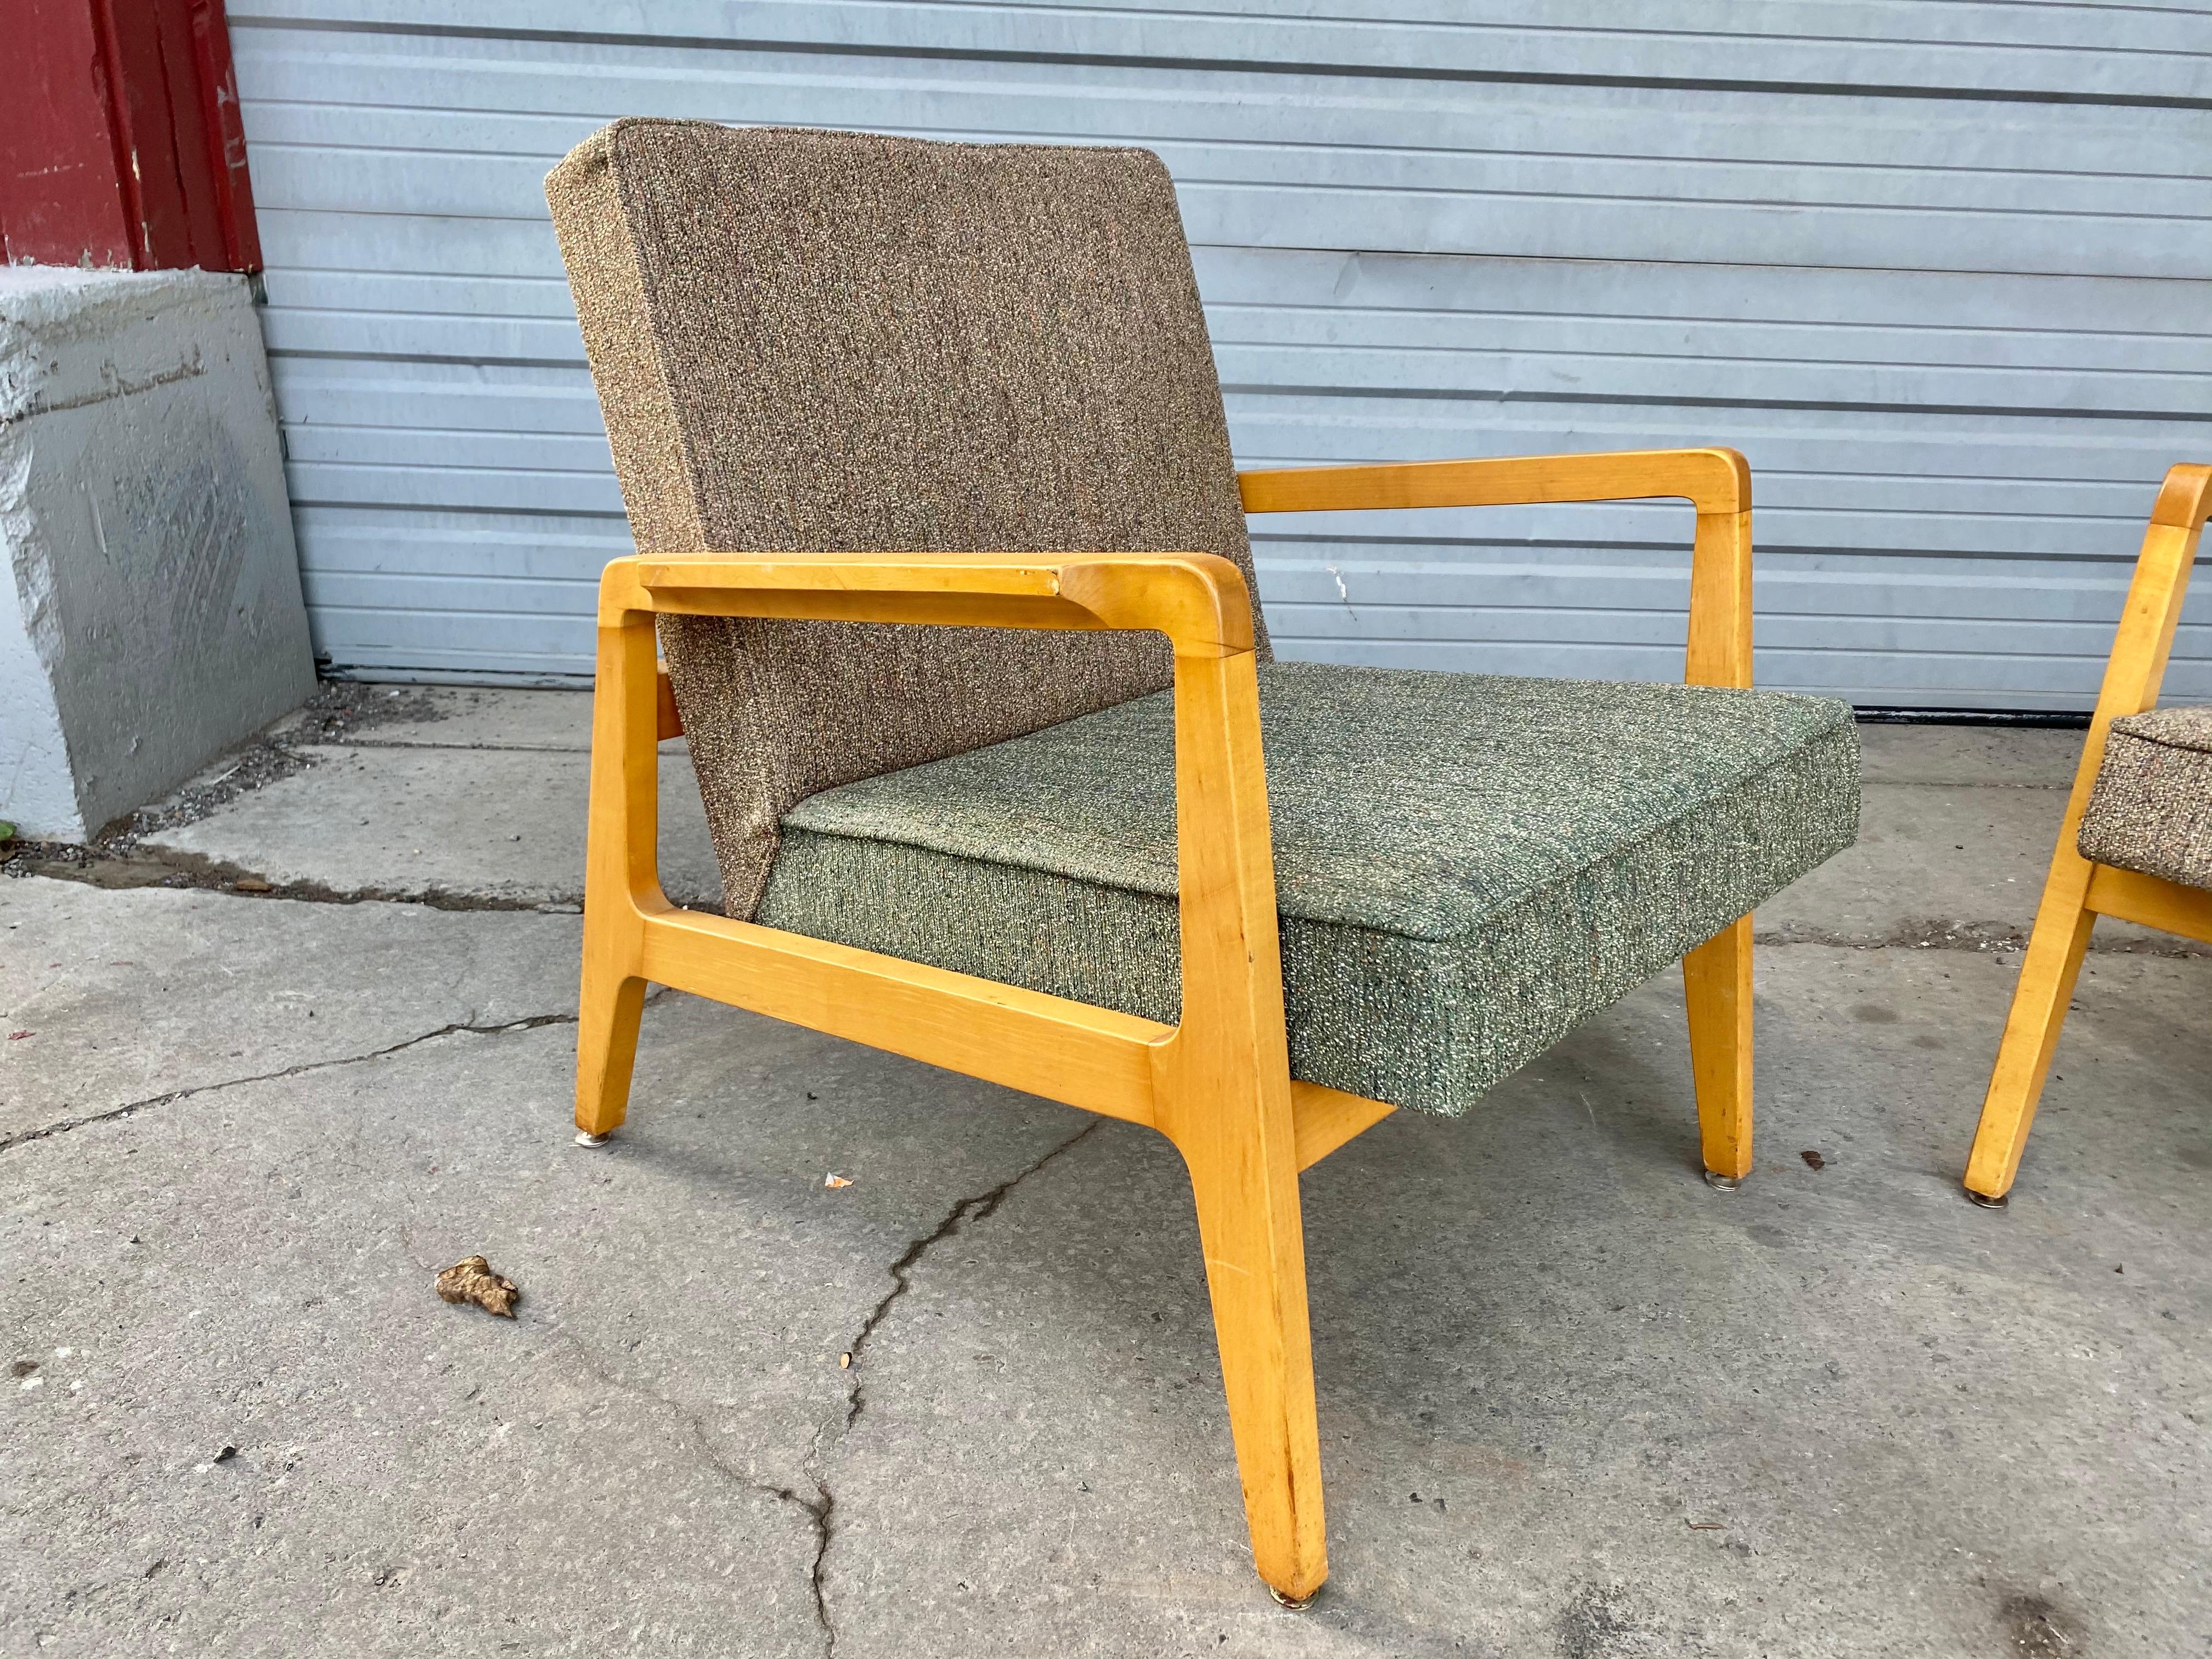 Stunning pair of modernist lounge chairs made by Gunlocke, manner of Jens Risom, amazing original condition, beautiful blond wood frames. Retain original two-tone wool fabric, extremely comfortable, superior quality and construction, hand delivery